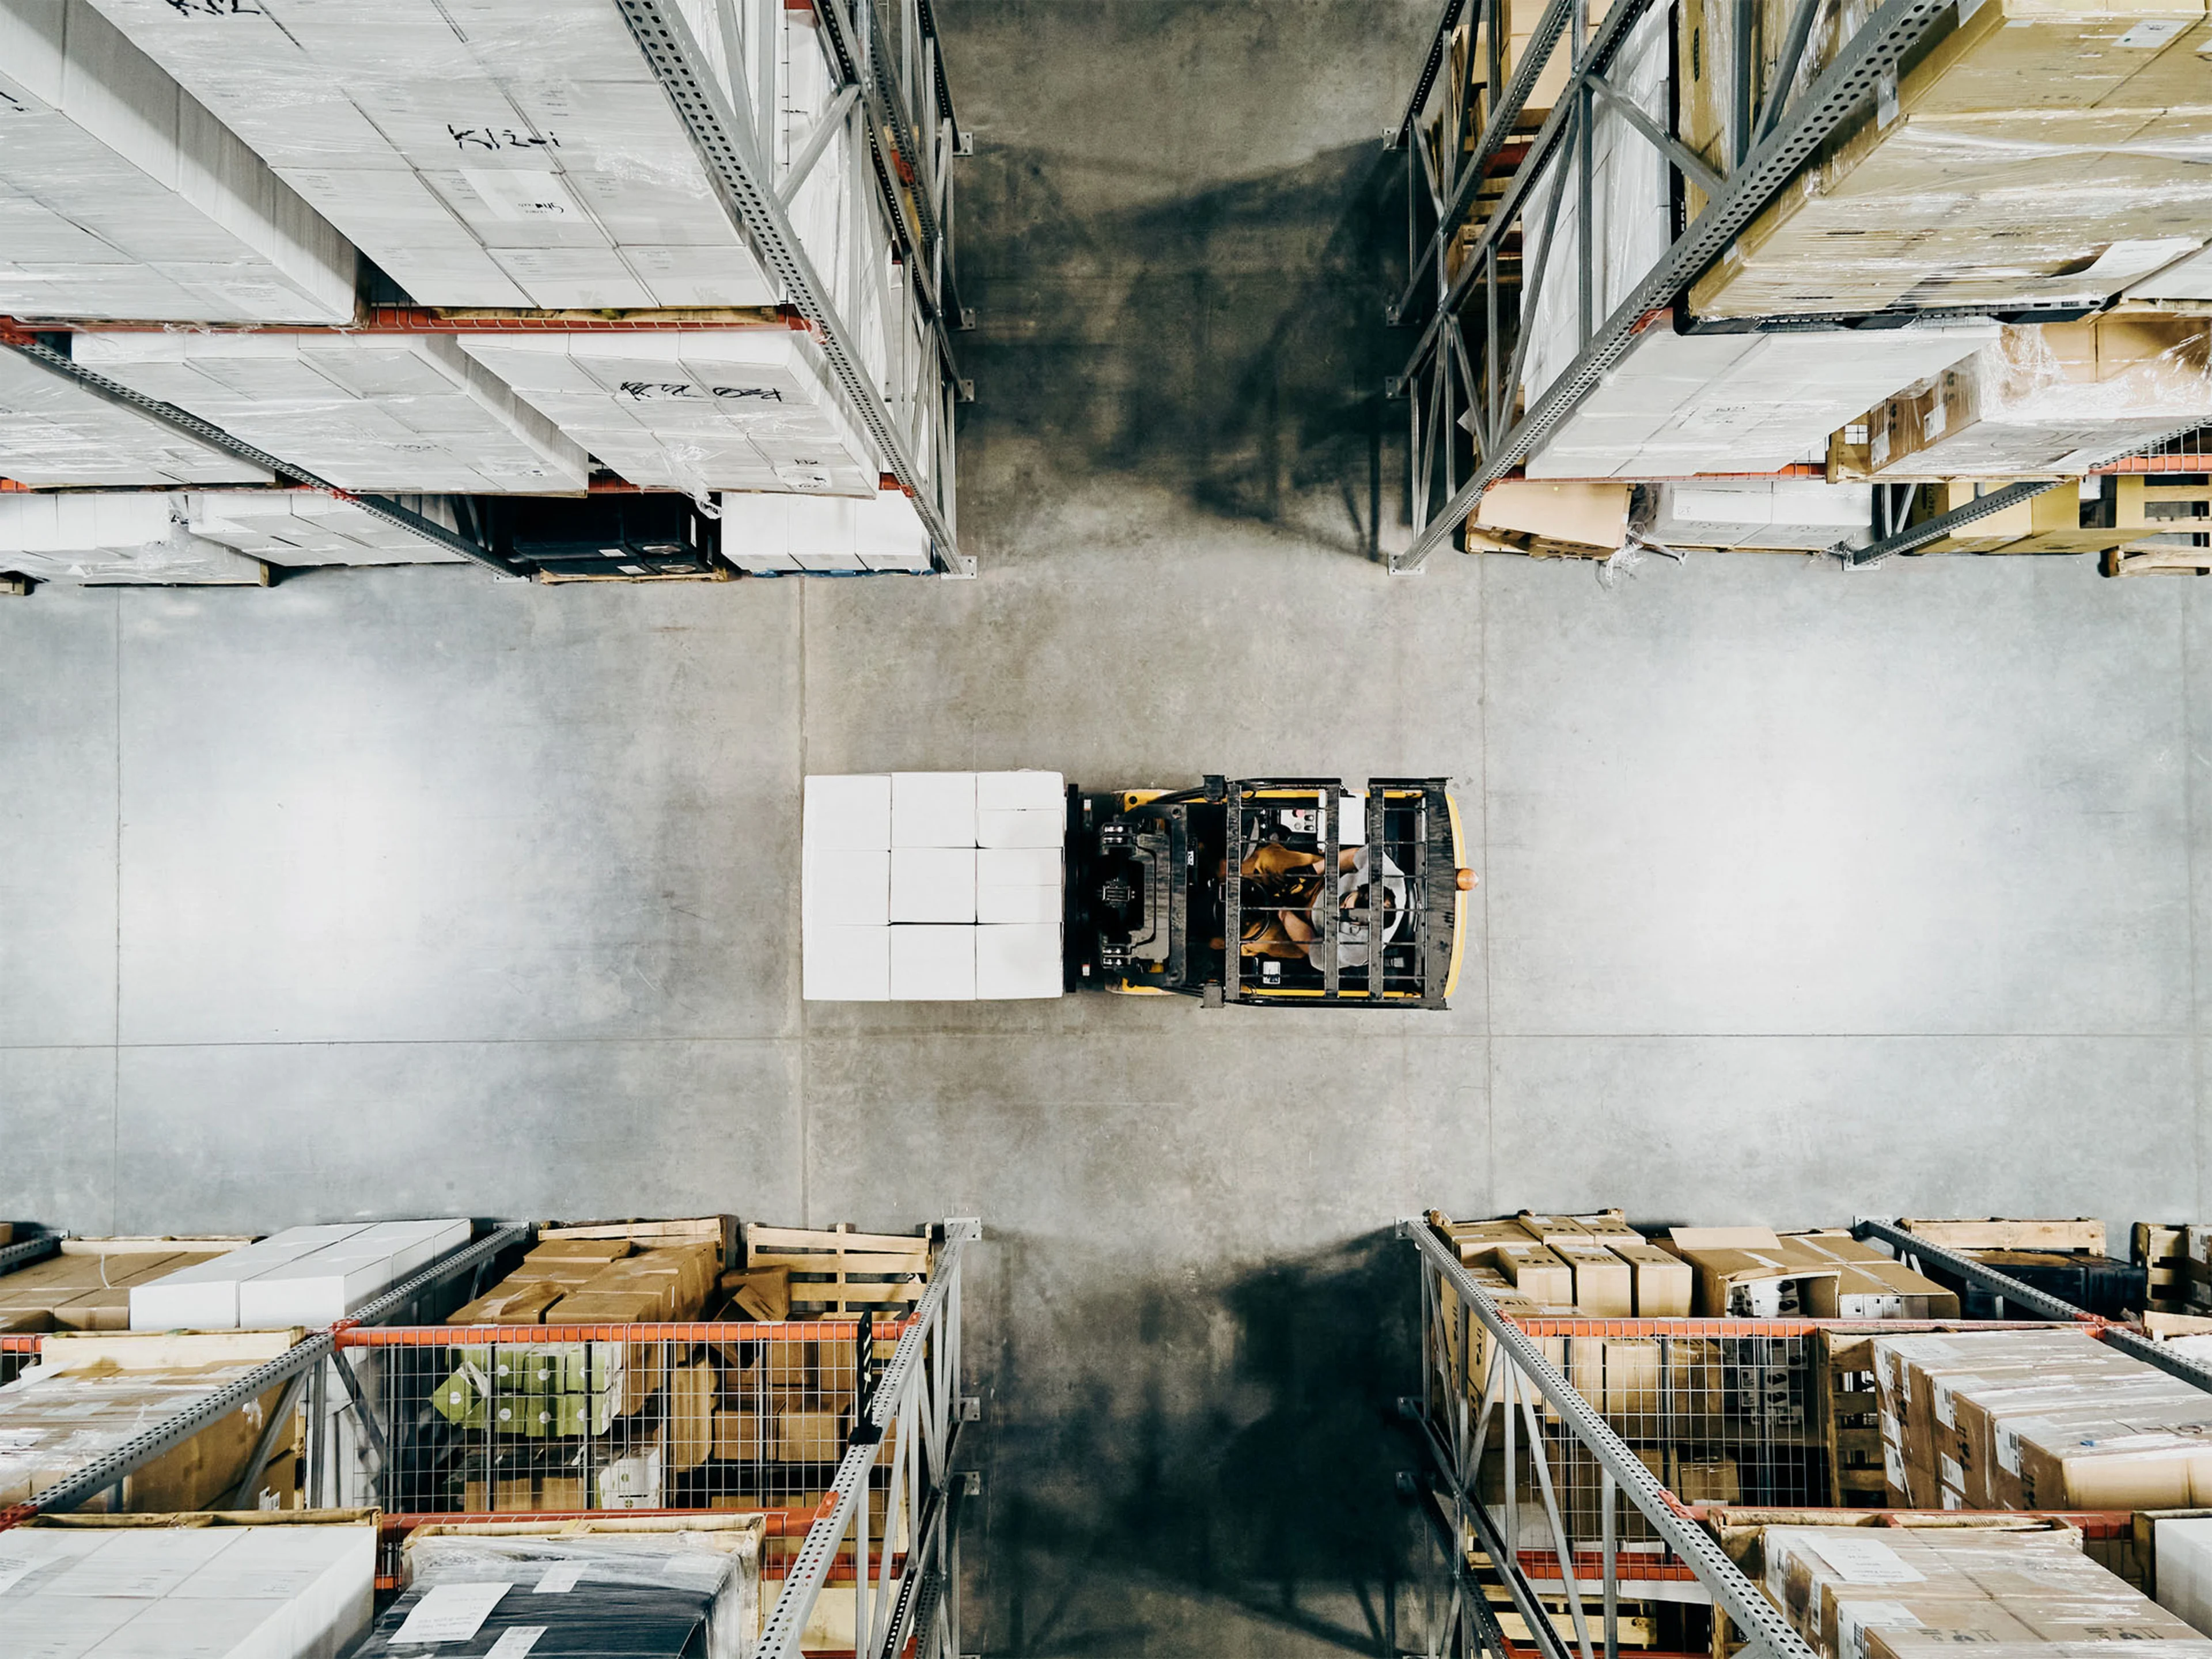 Overhead view of warehouse worker moving pallet of goods with forklift in warehouse.